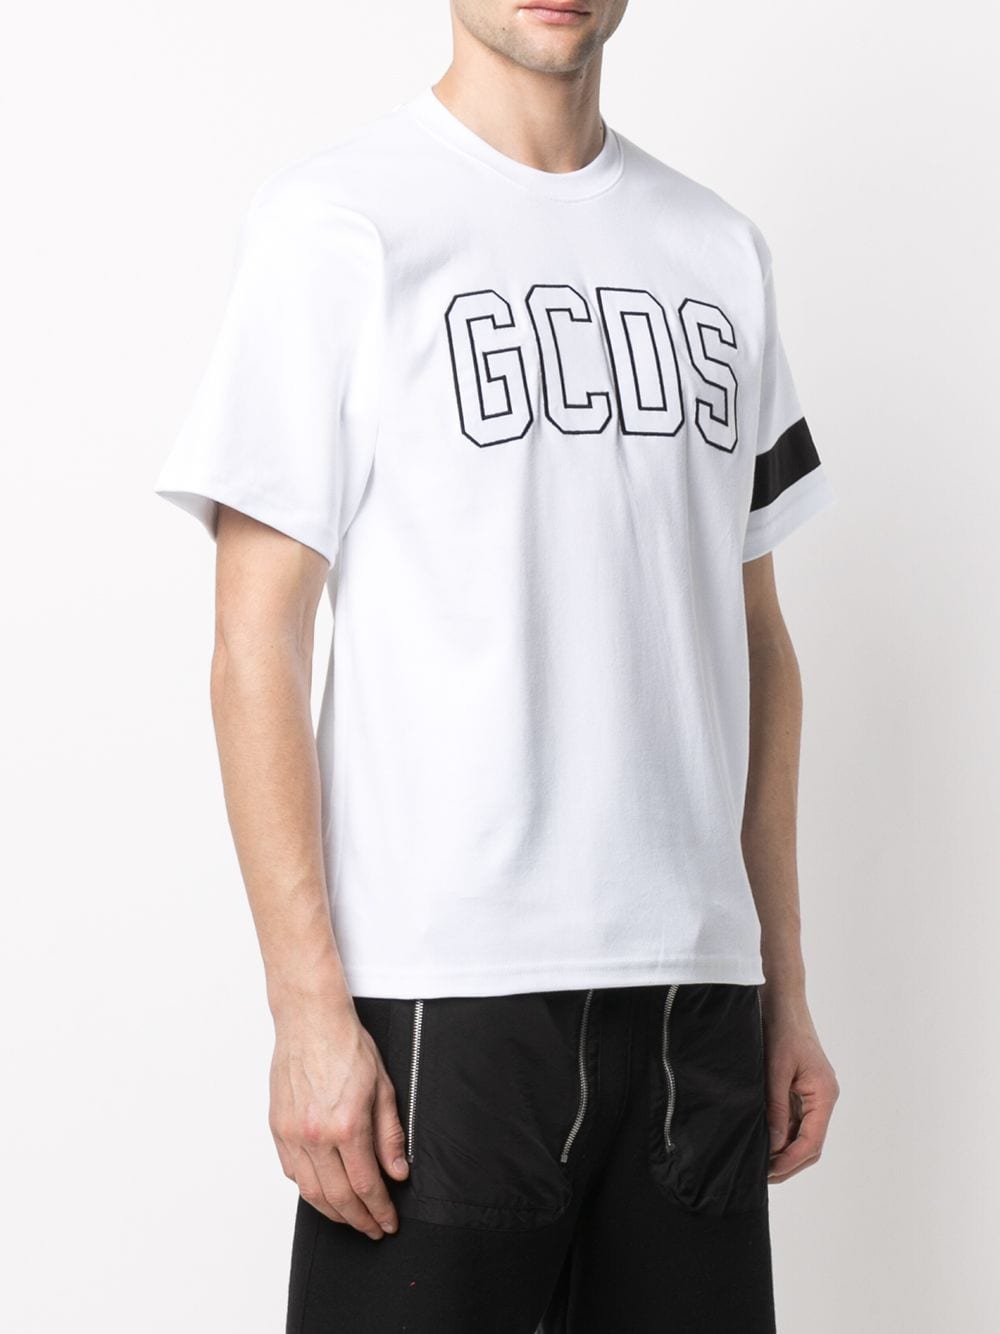 Shop Gcds embroidered-logo cotton T-shirt with Express Delivery - FARFETCH